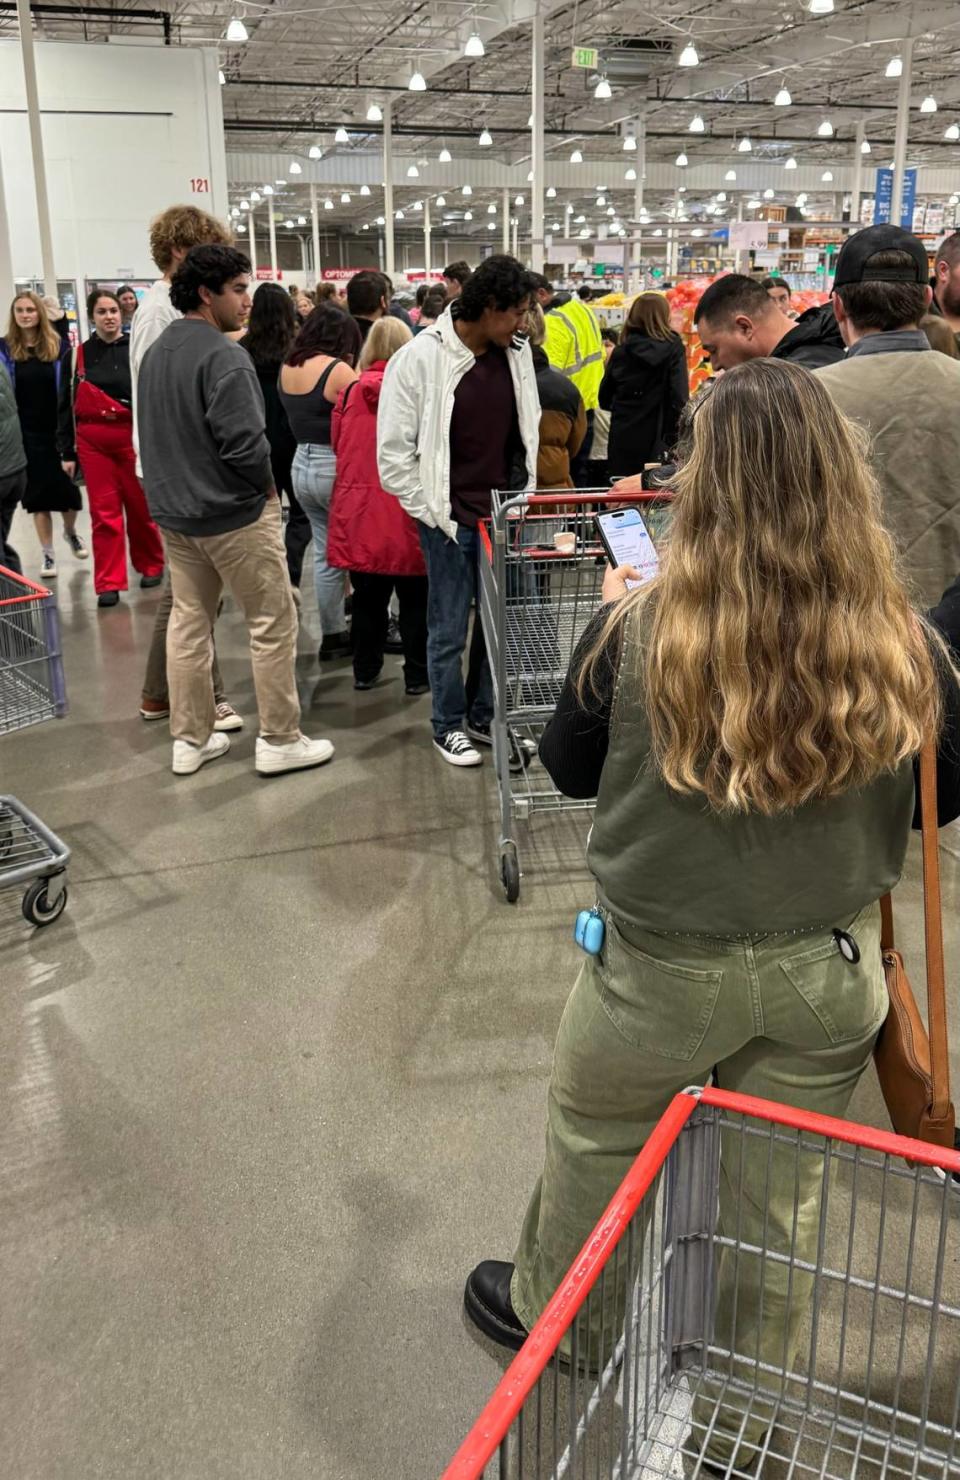 The line to get Guy Fieri to autograph his bottle of Santa Spirit tequila at Costco stretched all around the store all the way to the back past the frozen food section.